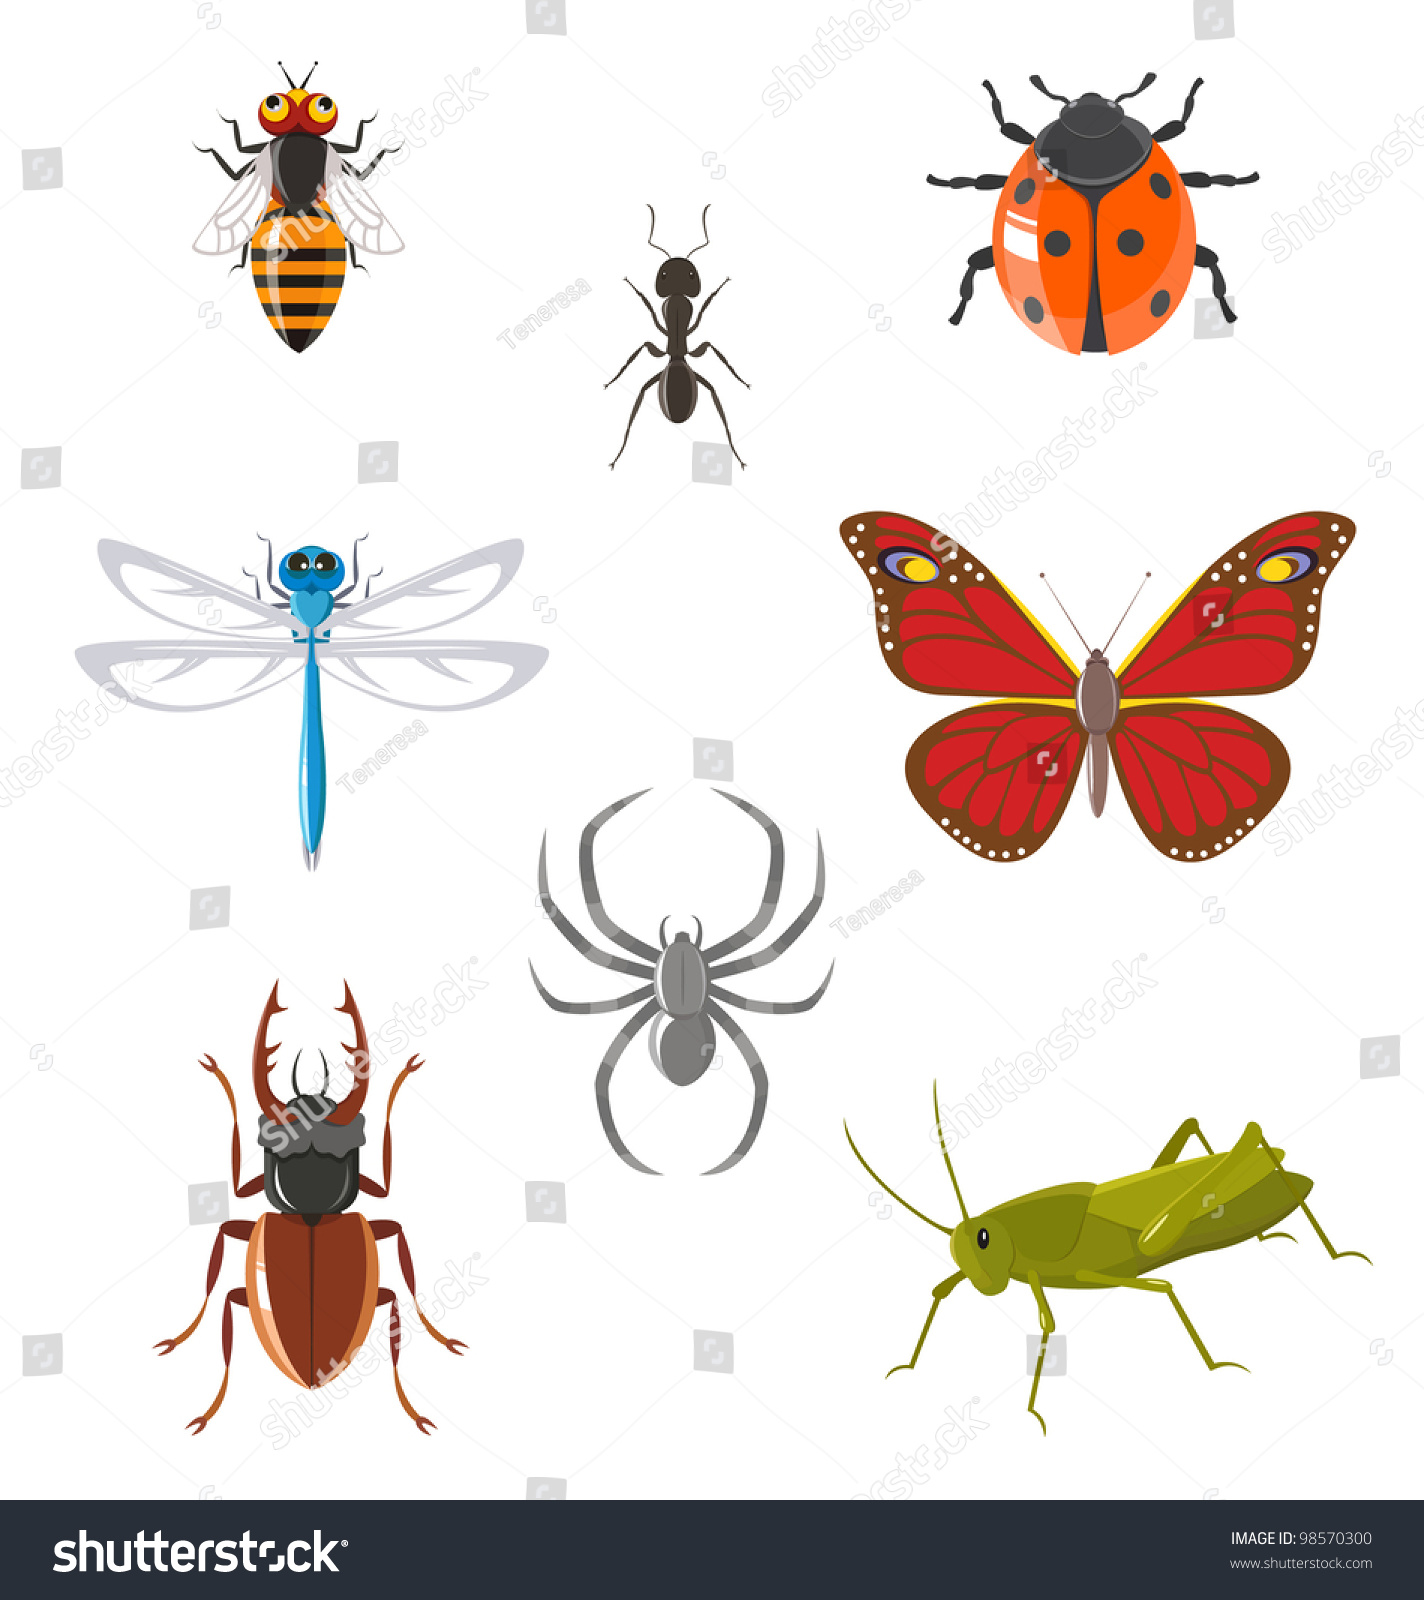 Set Of Various Insects Such As Ant, Butterfly, Beetle, Dragonfly ...